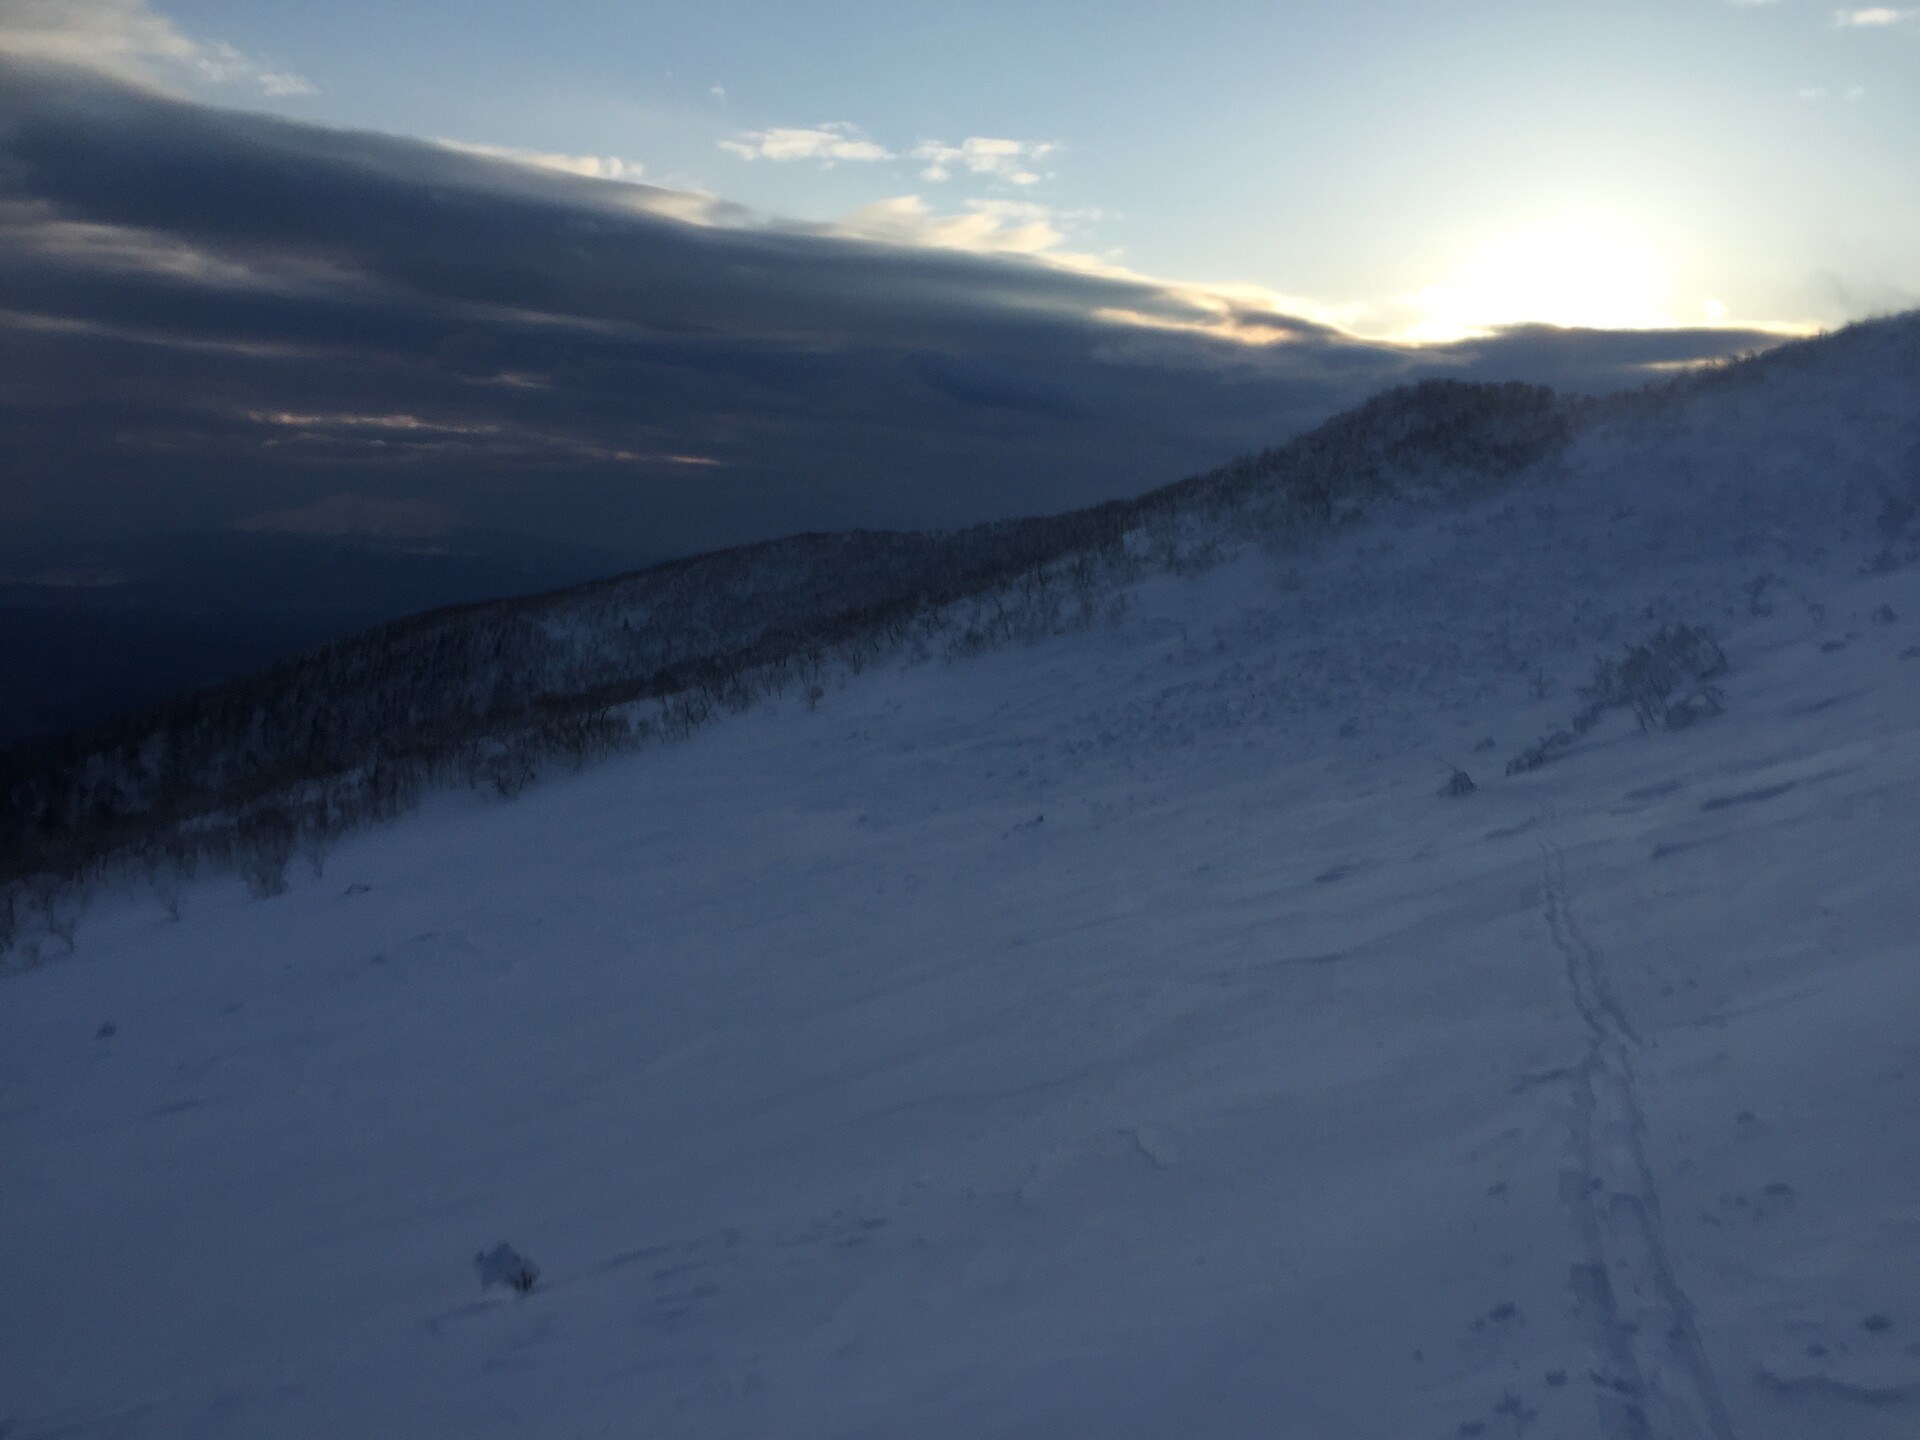 Looking down a windblown, treeless slope, covered with snow, dark clouds on the left and a sunrise on the right